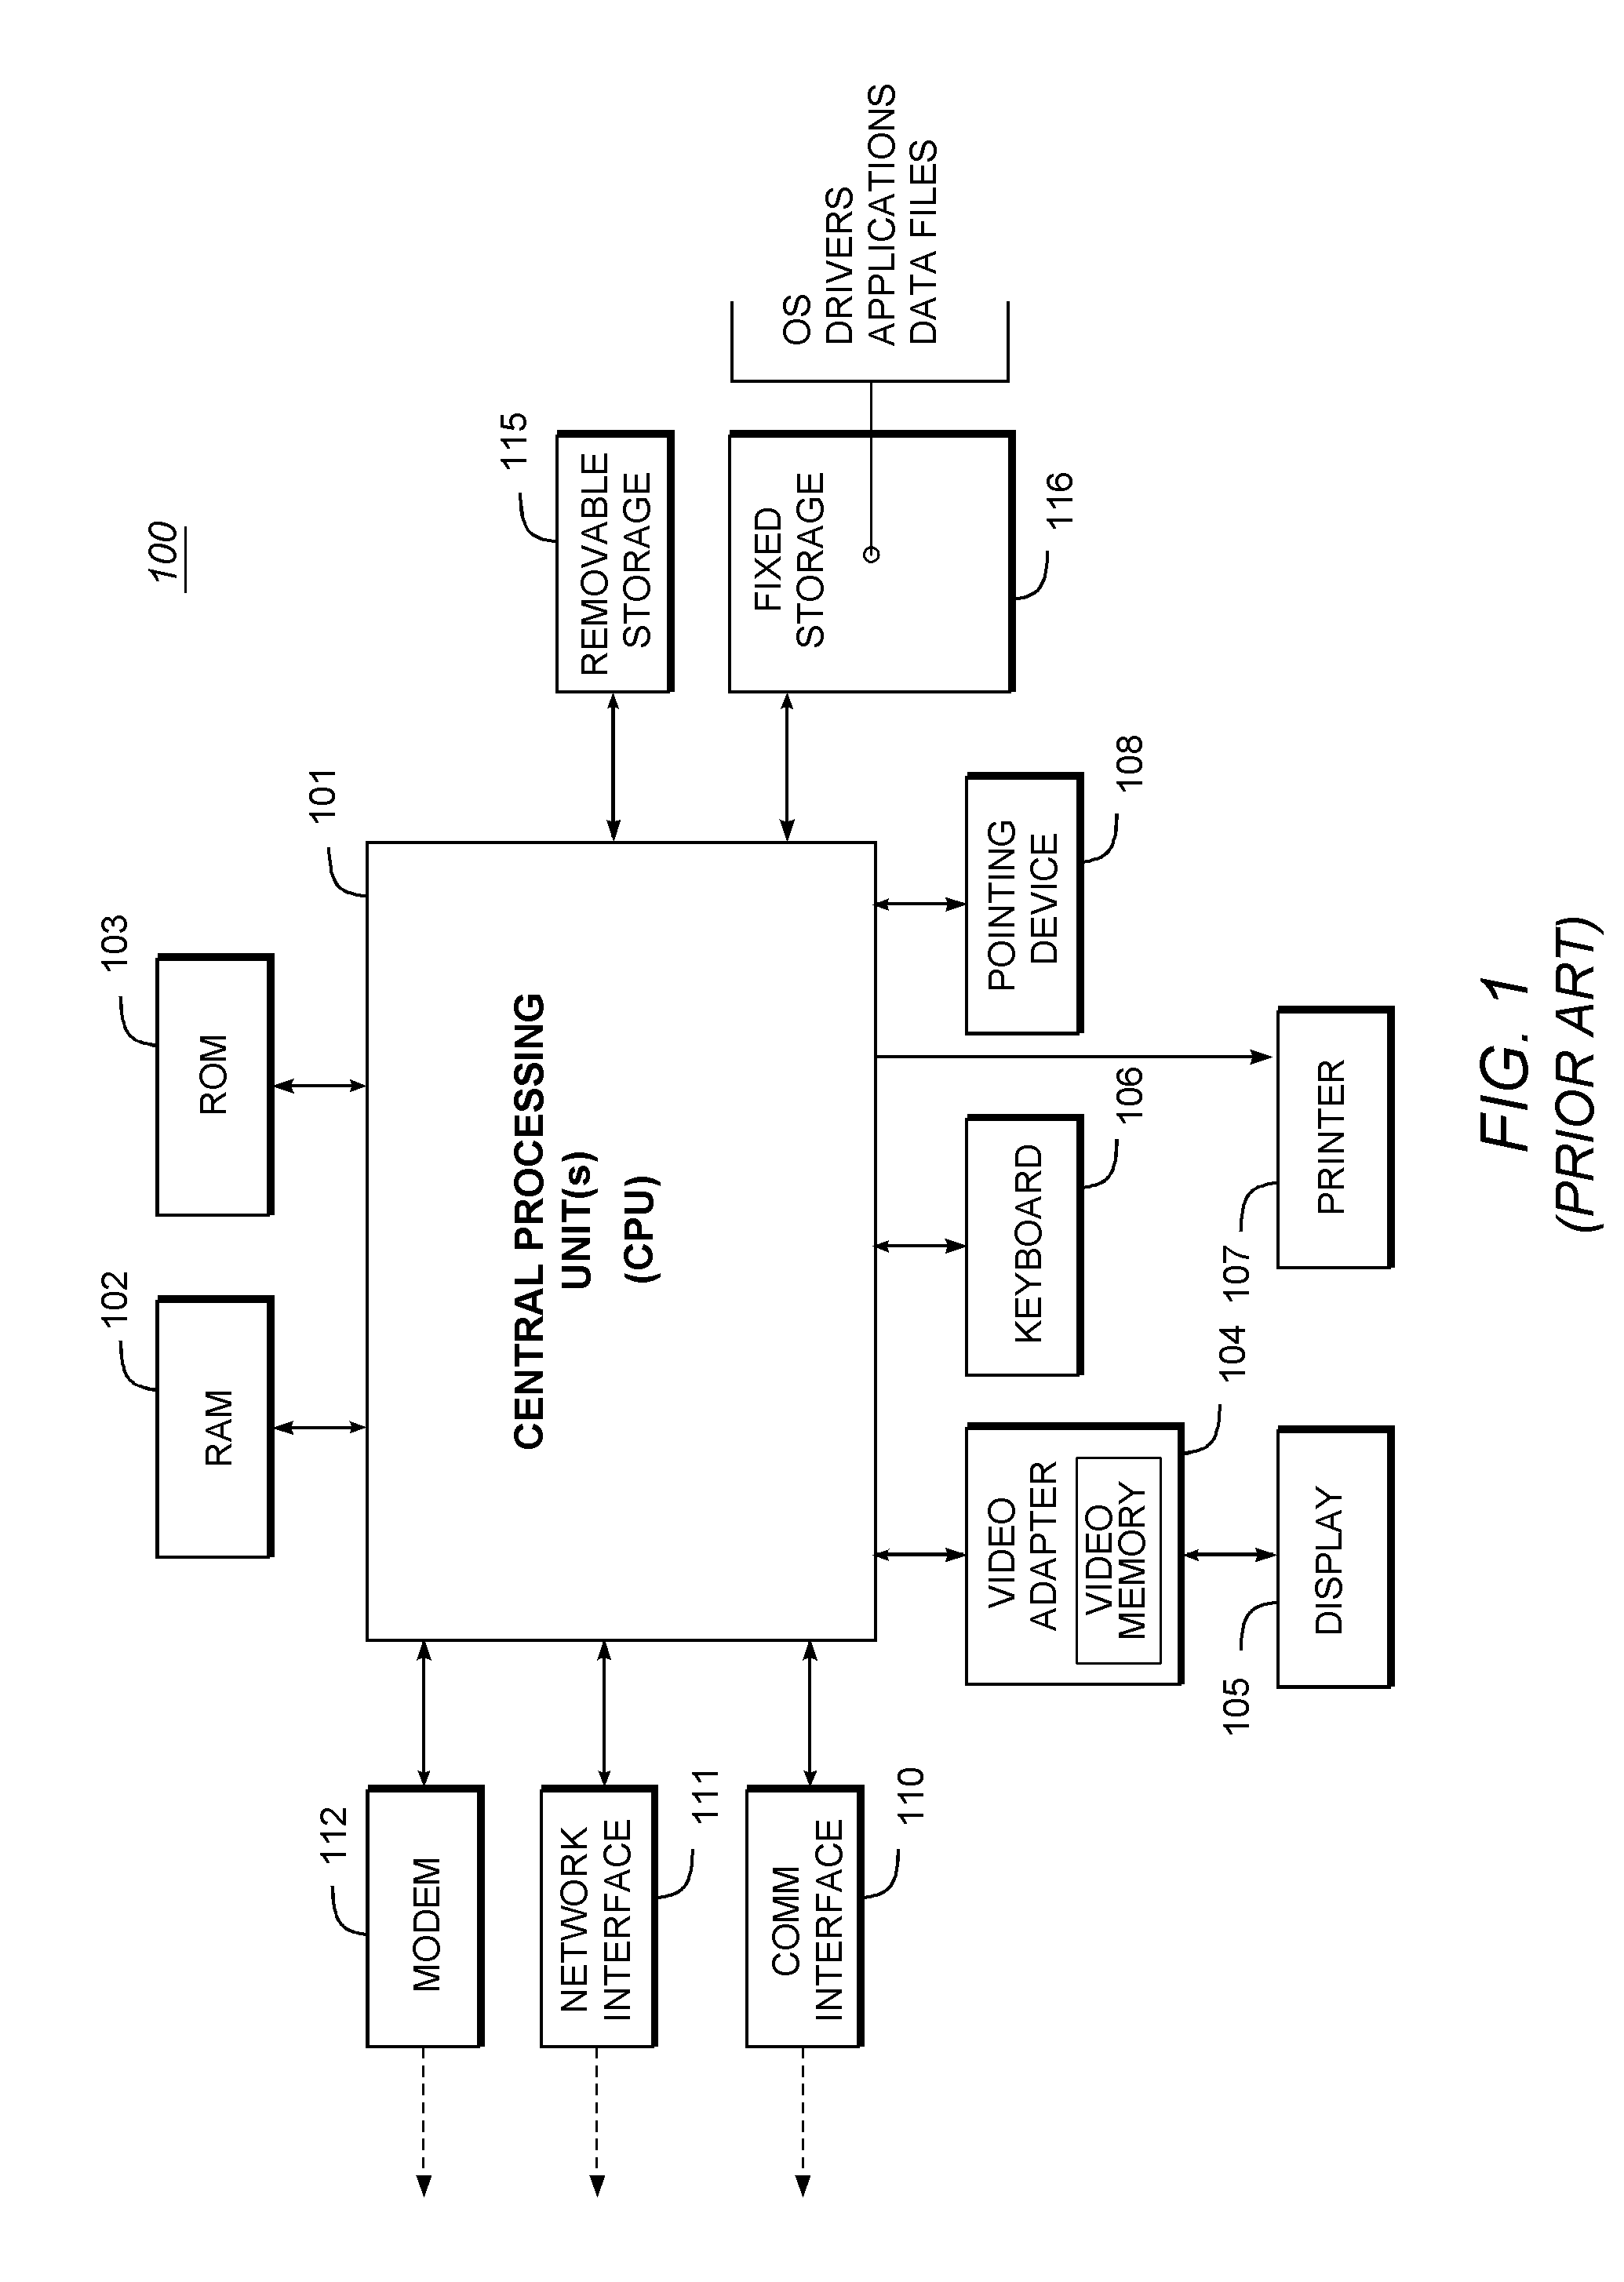 System with Methodology for Executing Relational Operations Over Relational Data and Data Retrieved from SOAP Operations